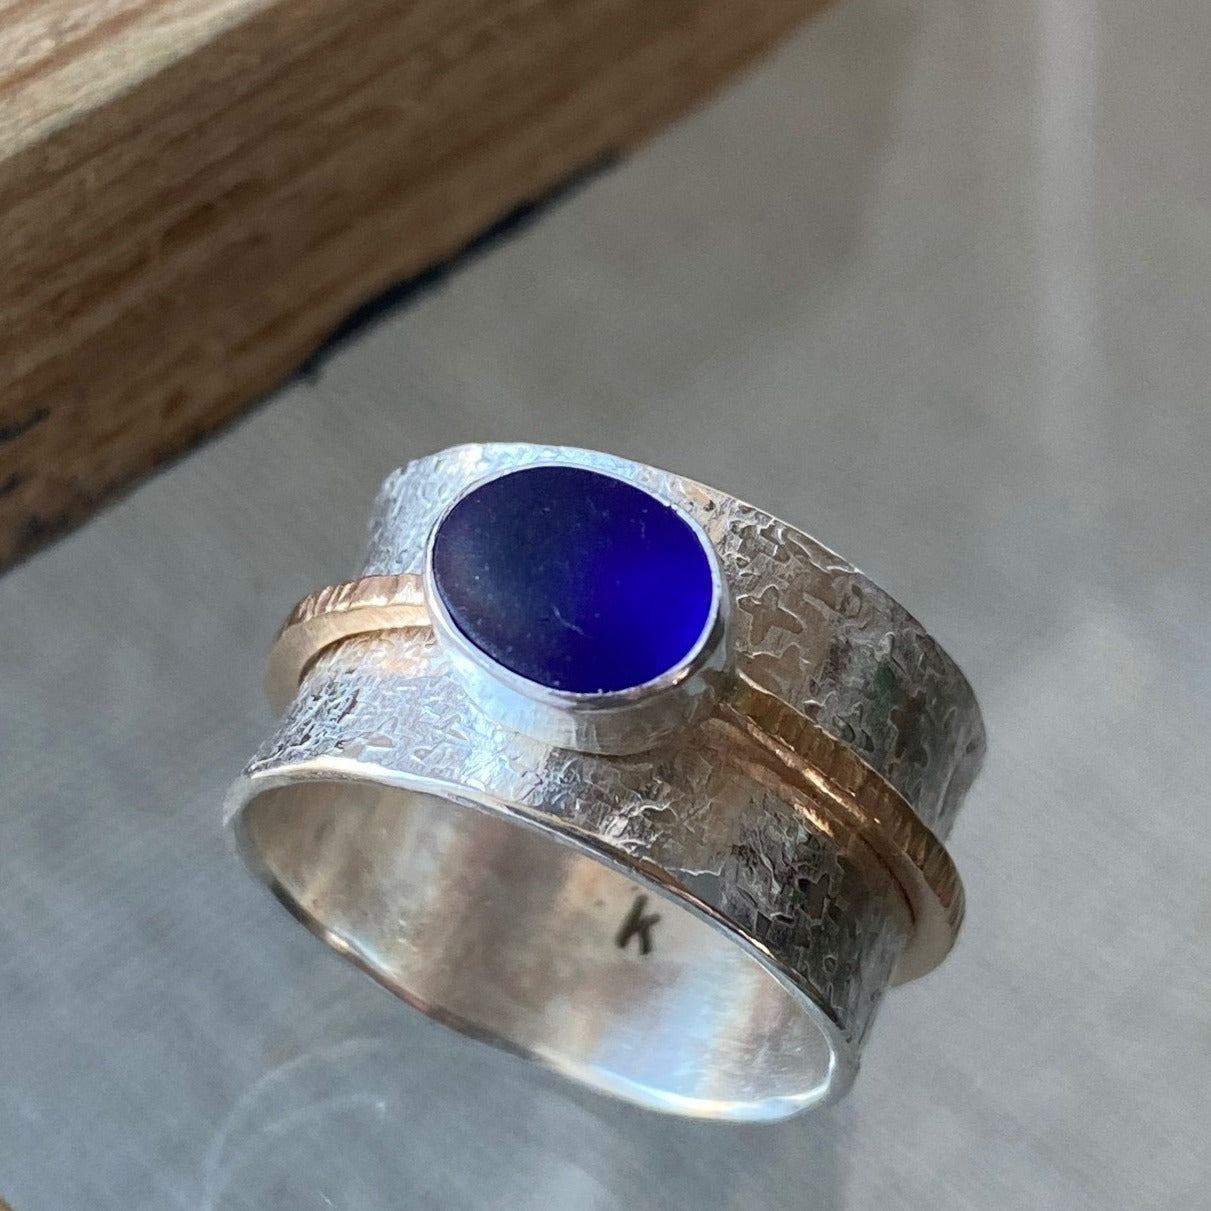 The Meditation Ring | Sea Glass Ring